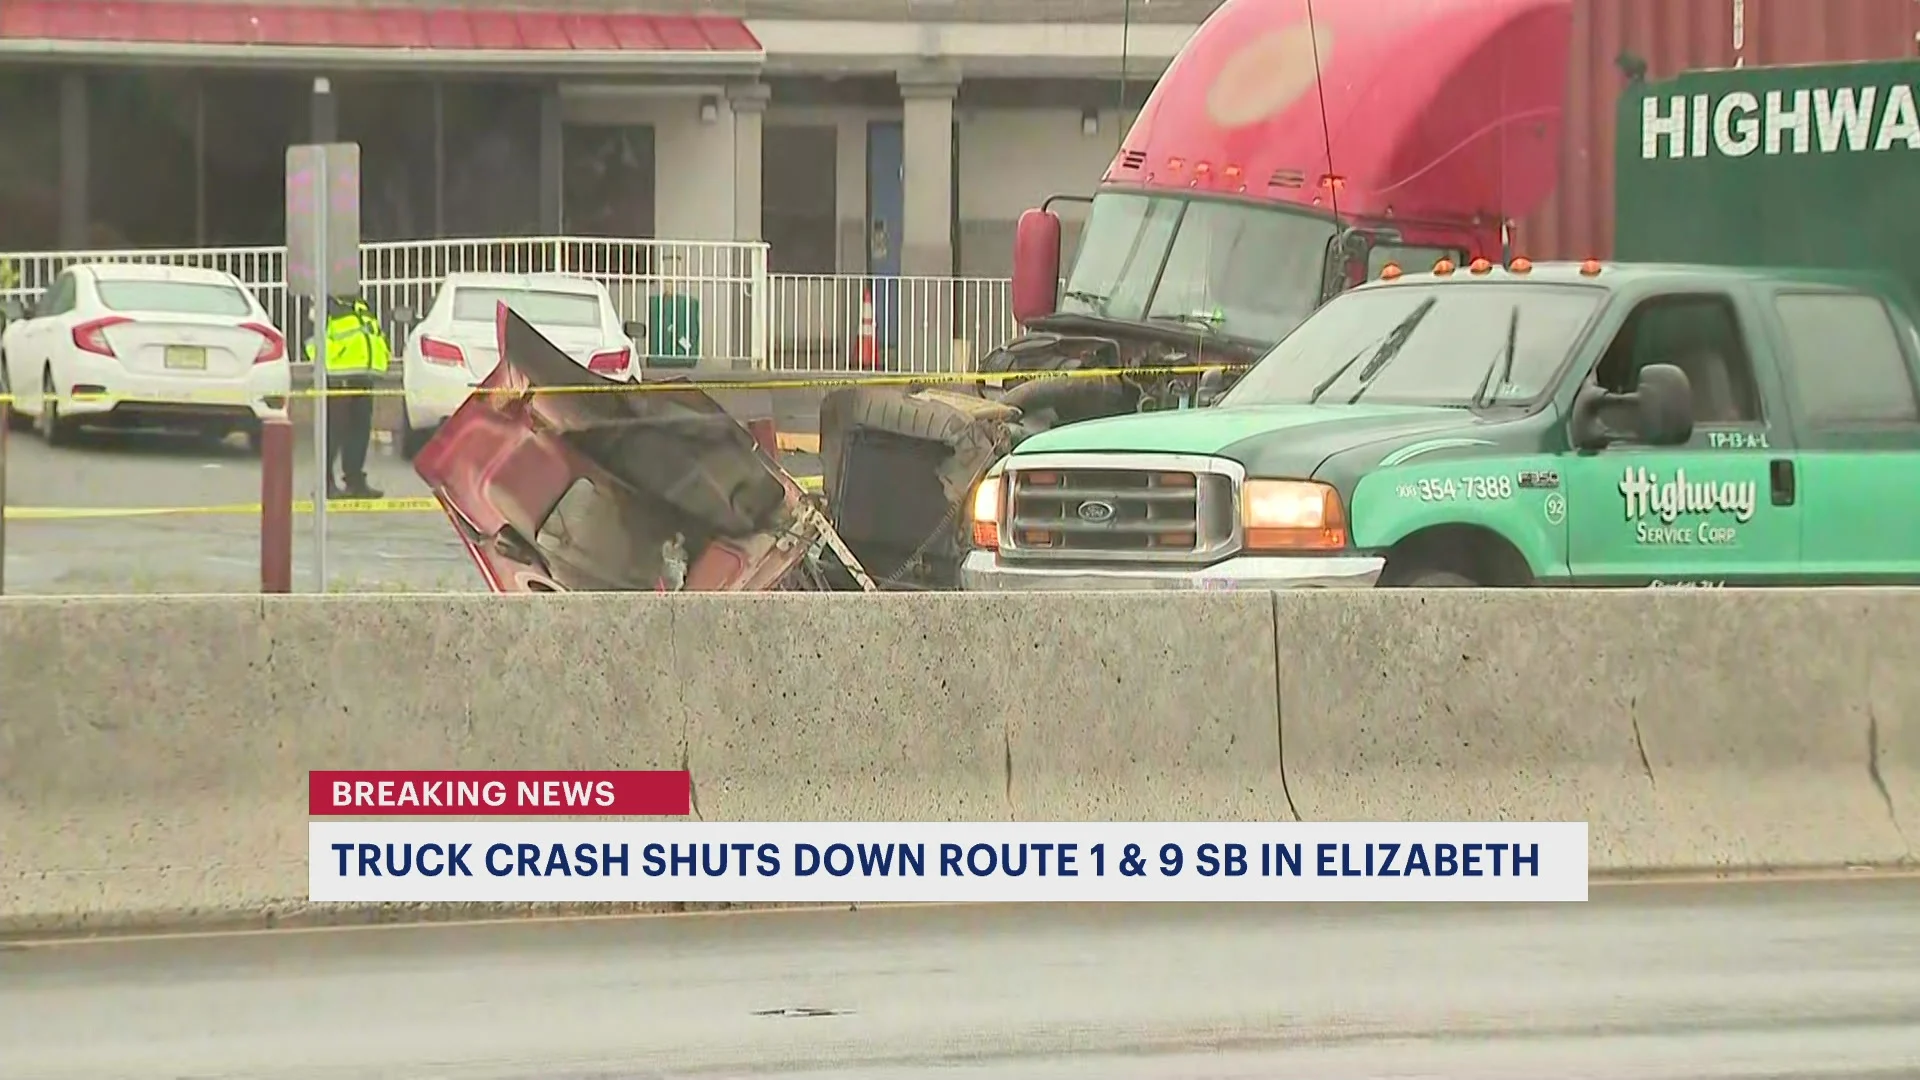 Truck crash, fuel spill shuts down portion of southbound Route 1&9 in Elizabeth